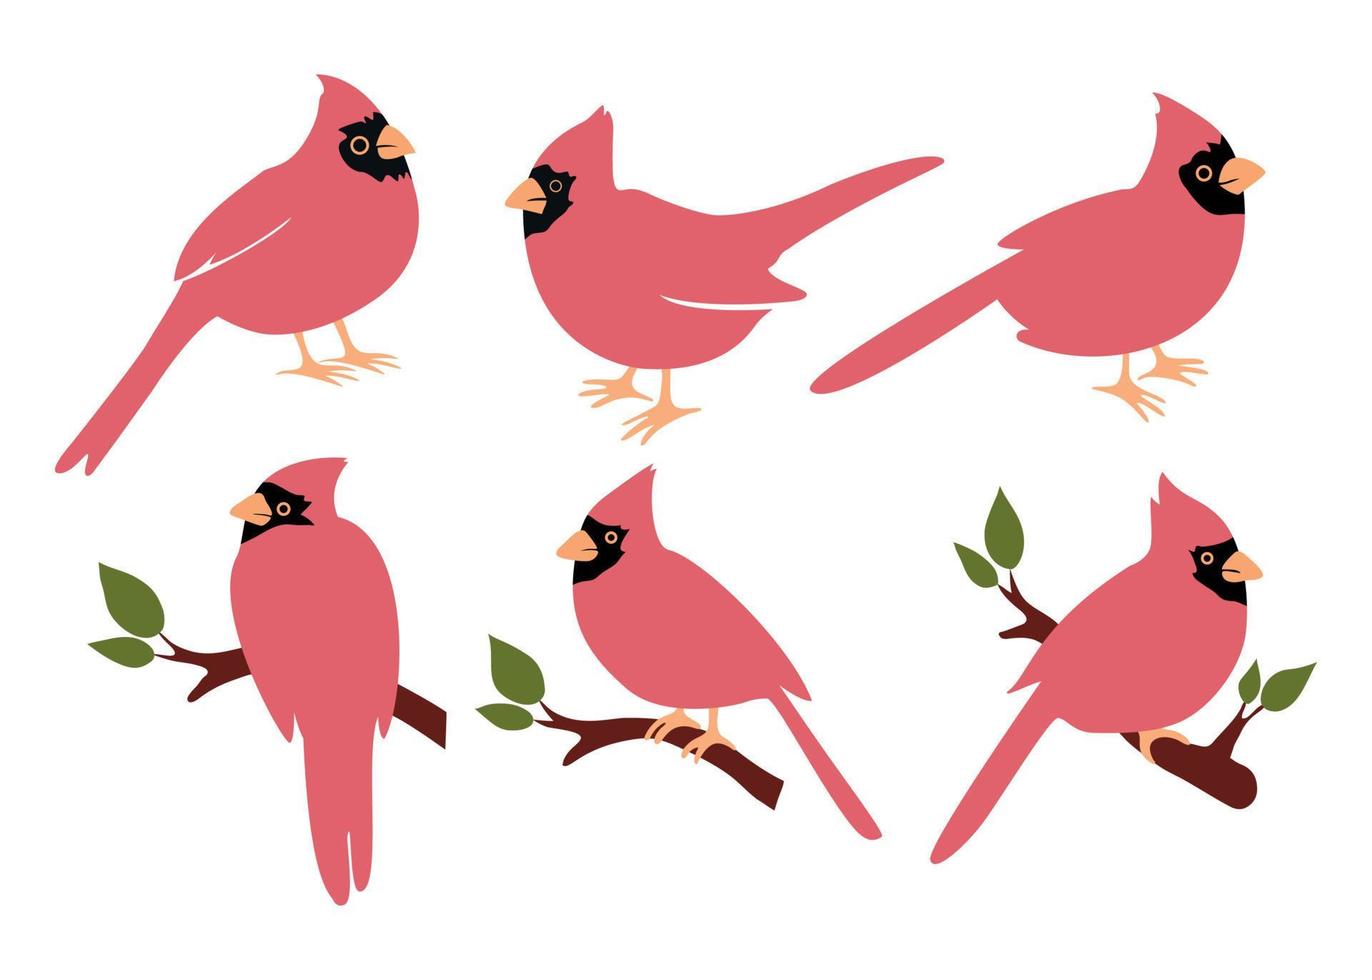 cardinal bird poses set of hand drawn illustrations white background flat style vector